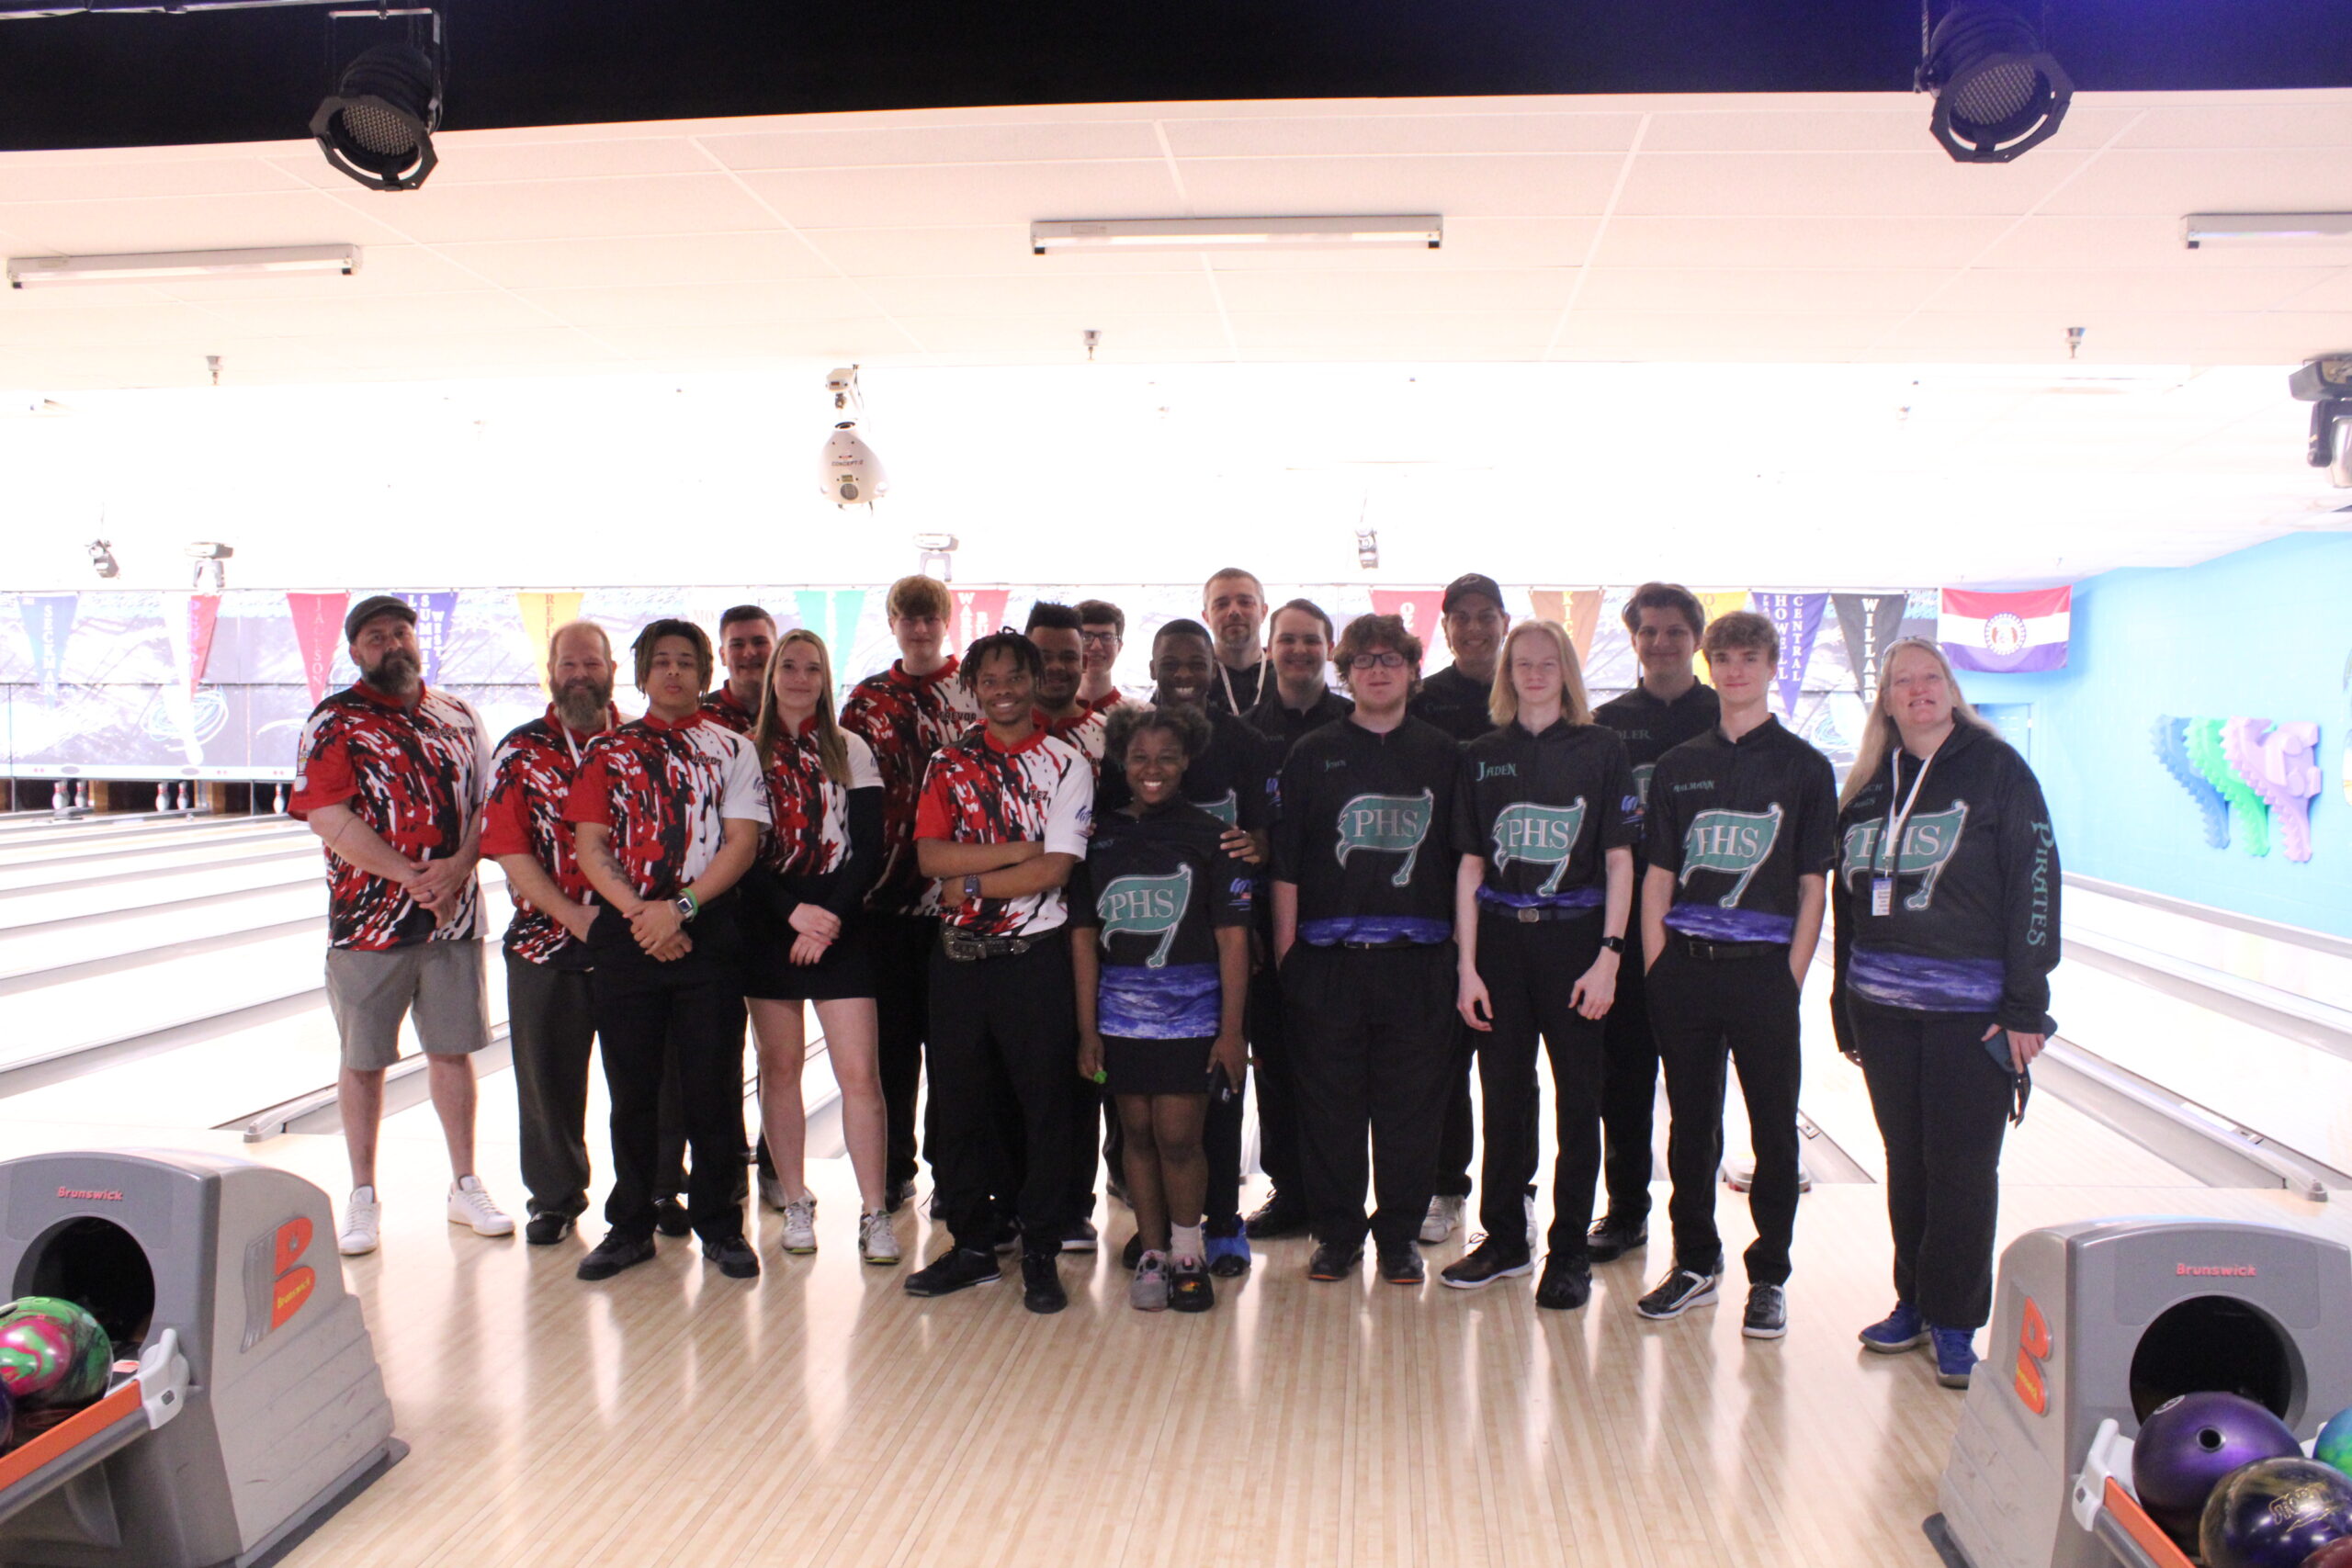 PHS’ bowling team competed against Hazelwood West as well as over 20 other schools at the state scratch tournament on May 6.